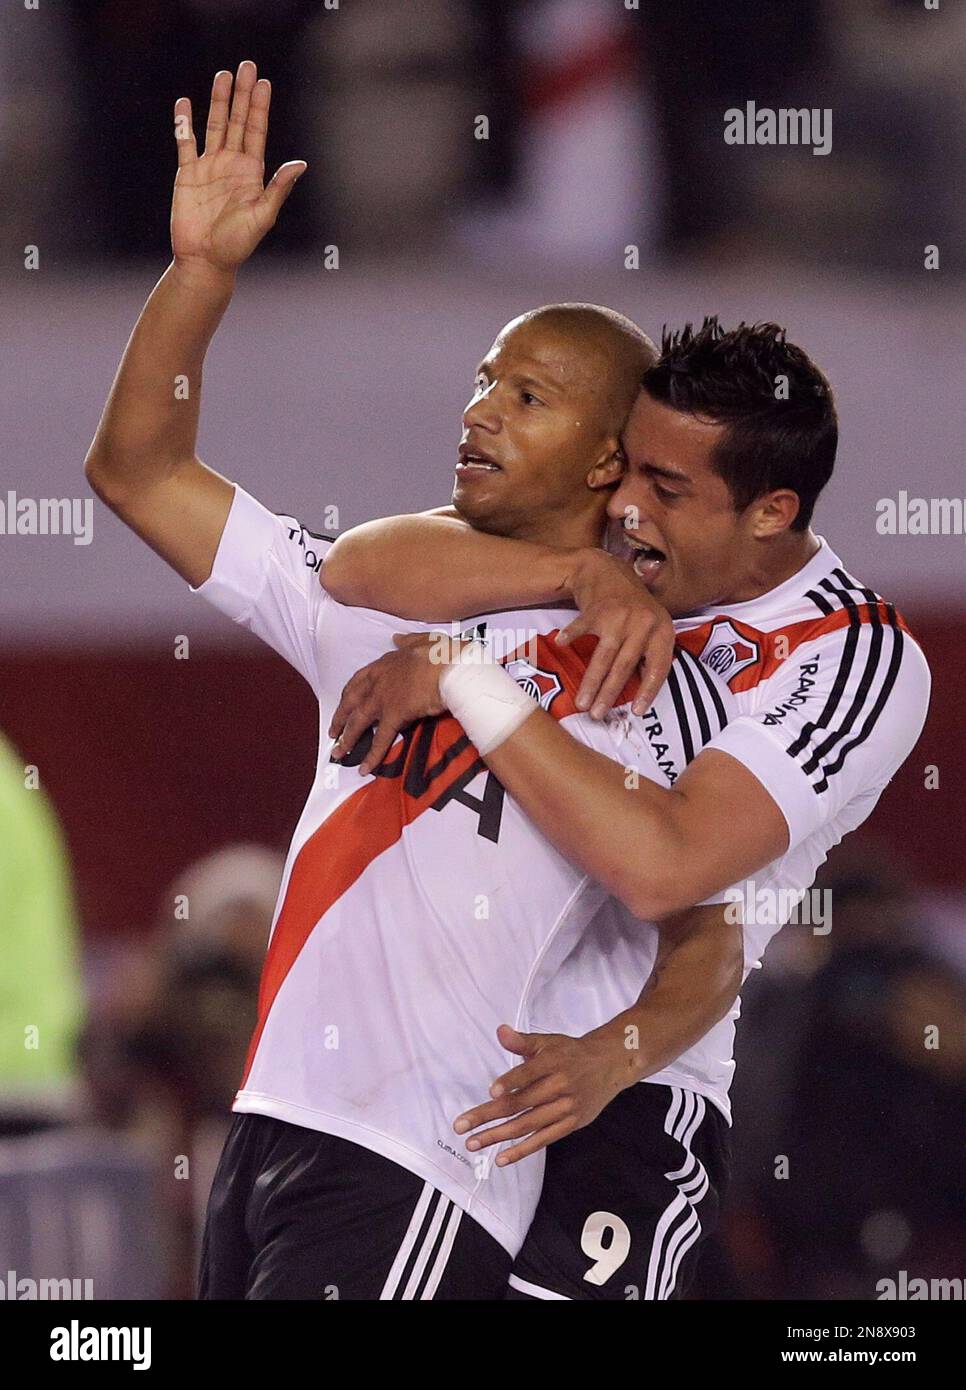 River Plate's Carlos Sanchez, left, celebrates with teammate Gabriel Funes  Mori, right, after scoring against Godoy Cruz during an Argentina's league  soccer match in Buenos Aires, Argentina, Sunday, Oct. 7, 2012. (AP